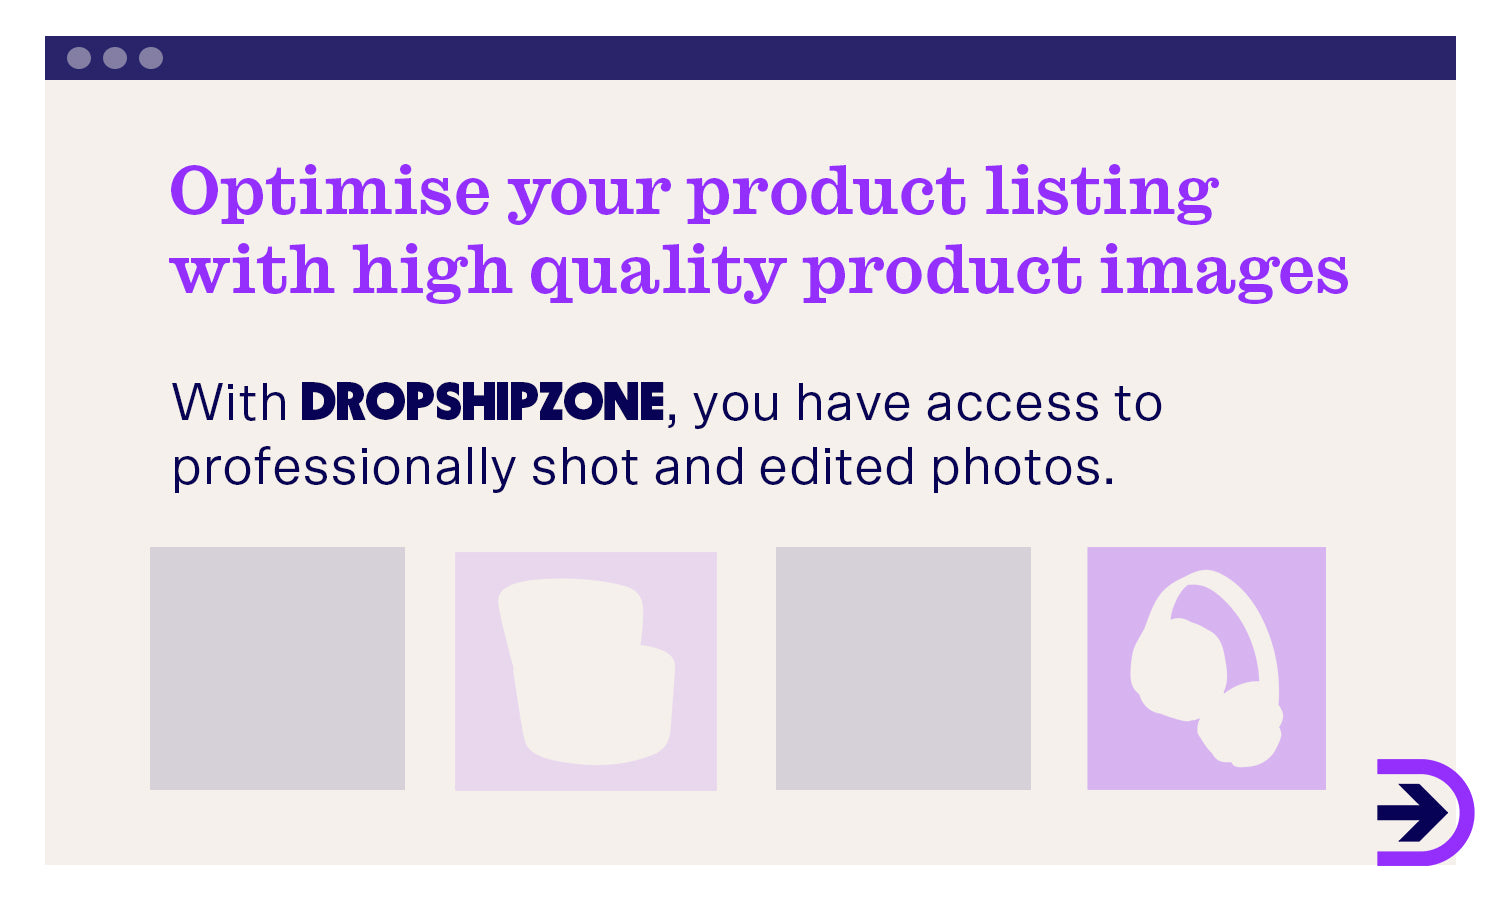 Dropshipzone provides high quality images and product descriptions to make listing items easy.